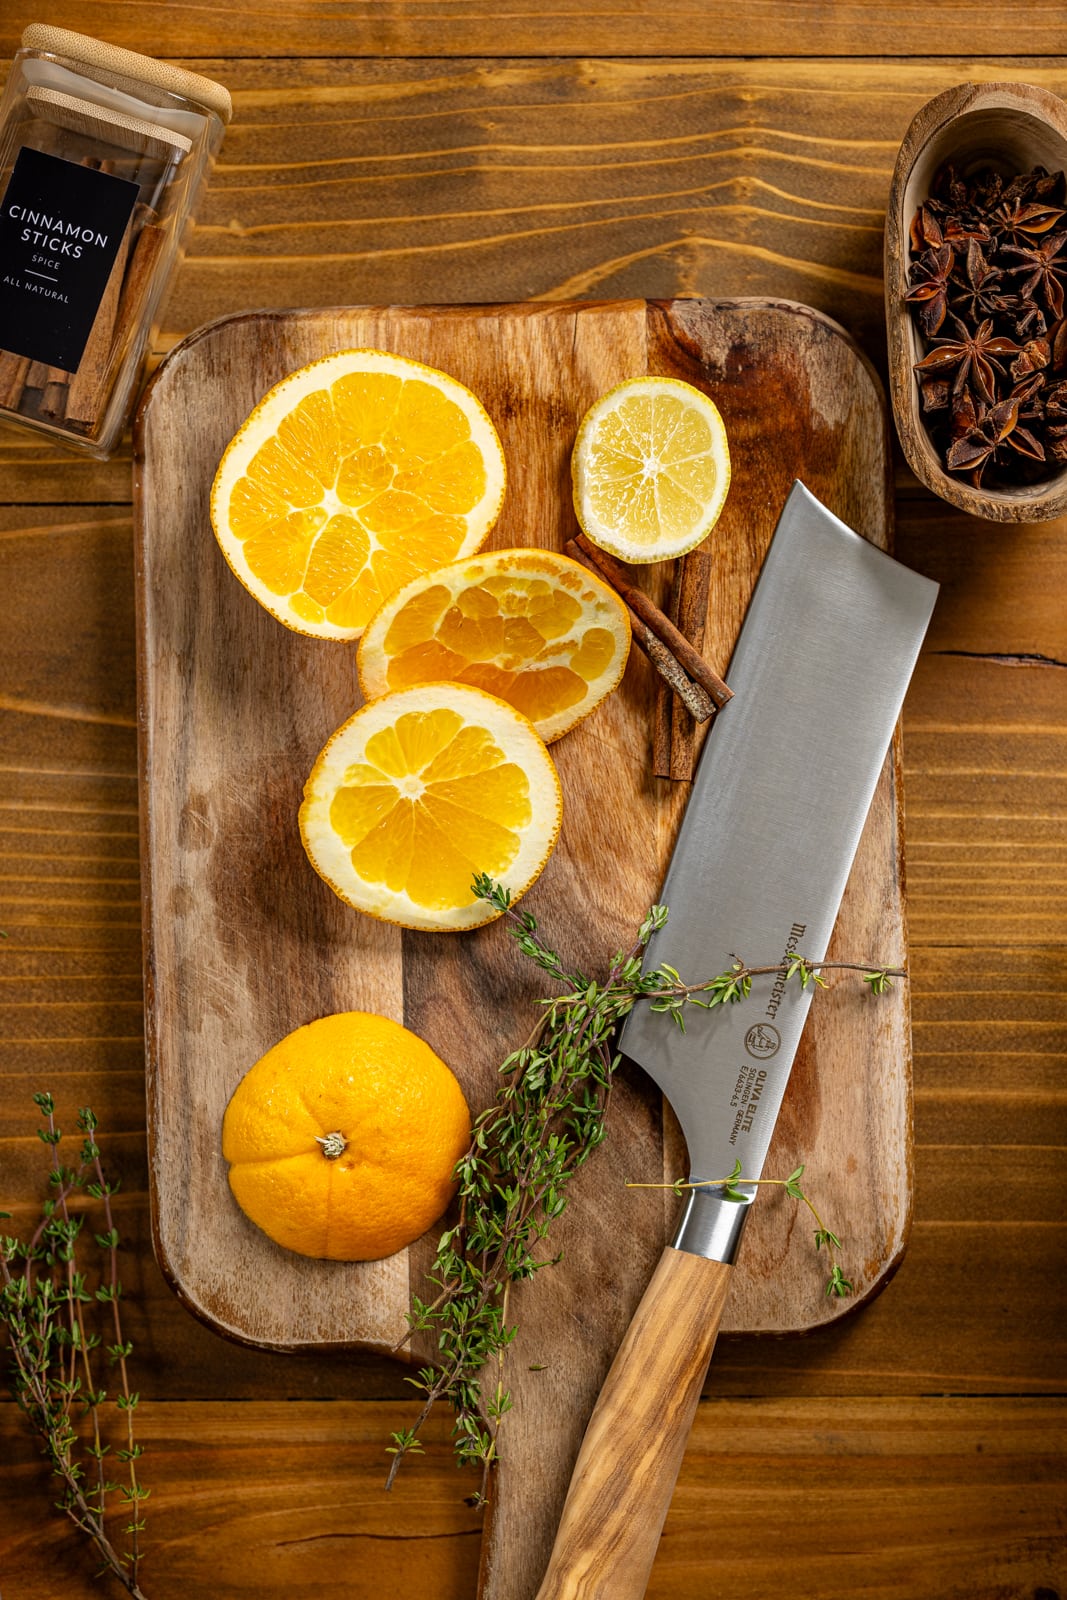 Sliced oranges and lemon with ingredients on a cutting board with knife.